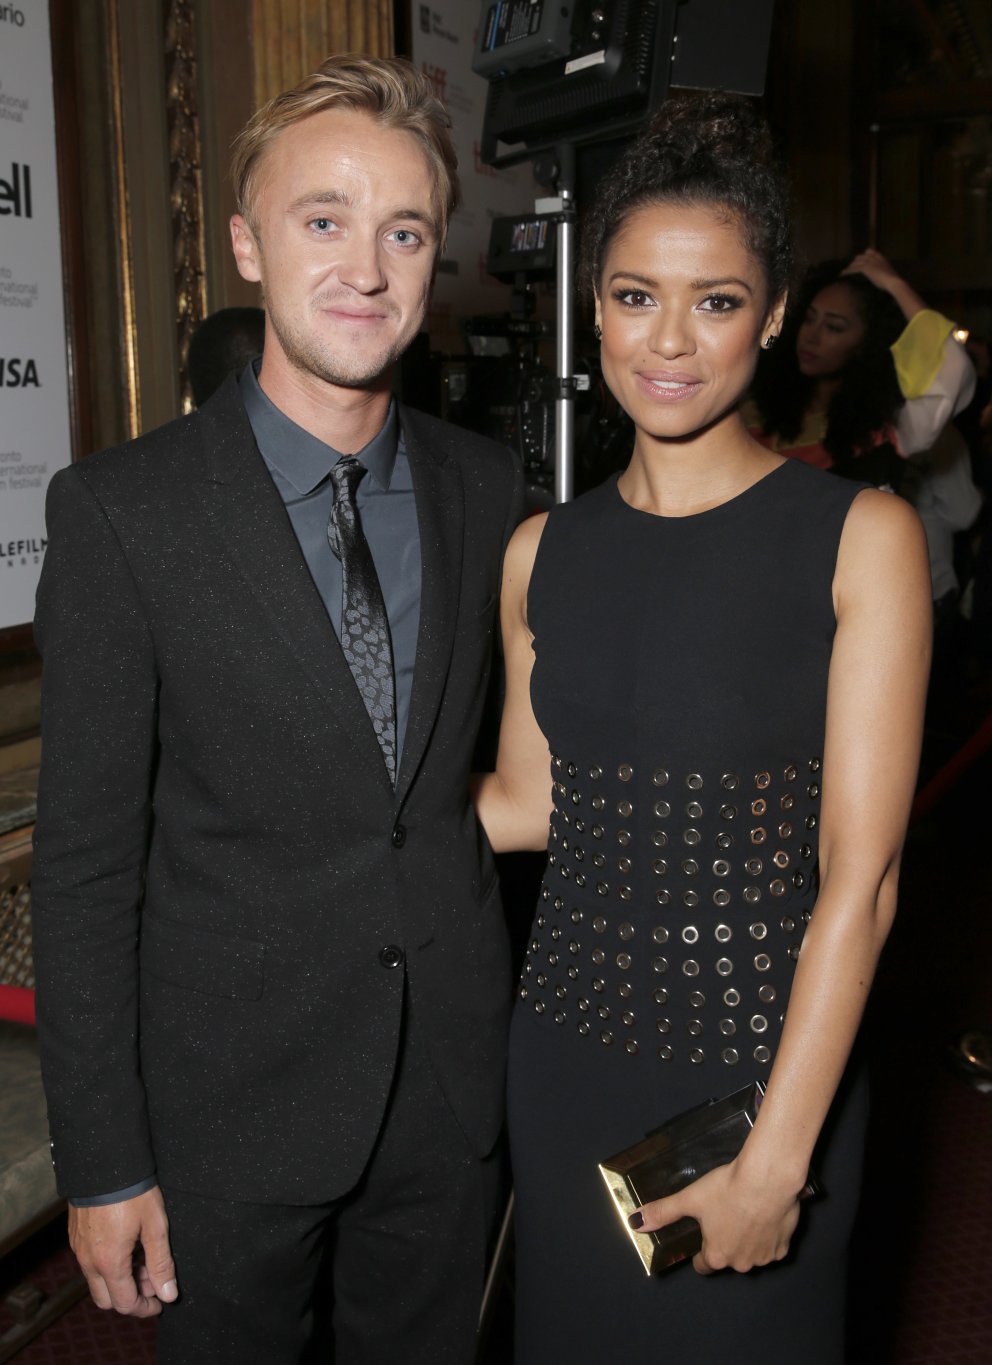 IMAGE DISTRIBUTED FOR FOX SEARCHLIGHT - Tom Felton and Gugu Mbatha Raw attend Fox Searchlight's Premiere of "Belle" at the Toronto International Film Festival on Sunday, Sept. 8, 2013 in Toronto. (Photo by Todd Williamson/Invision for Fox Searchlight/AP Images)